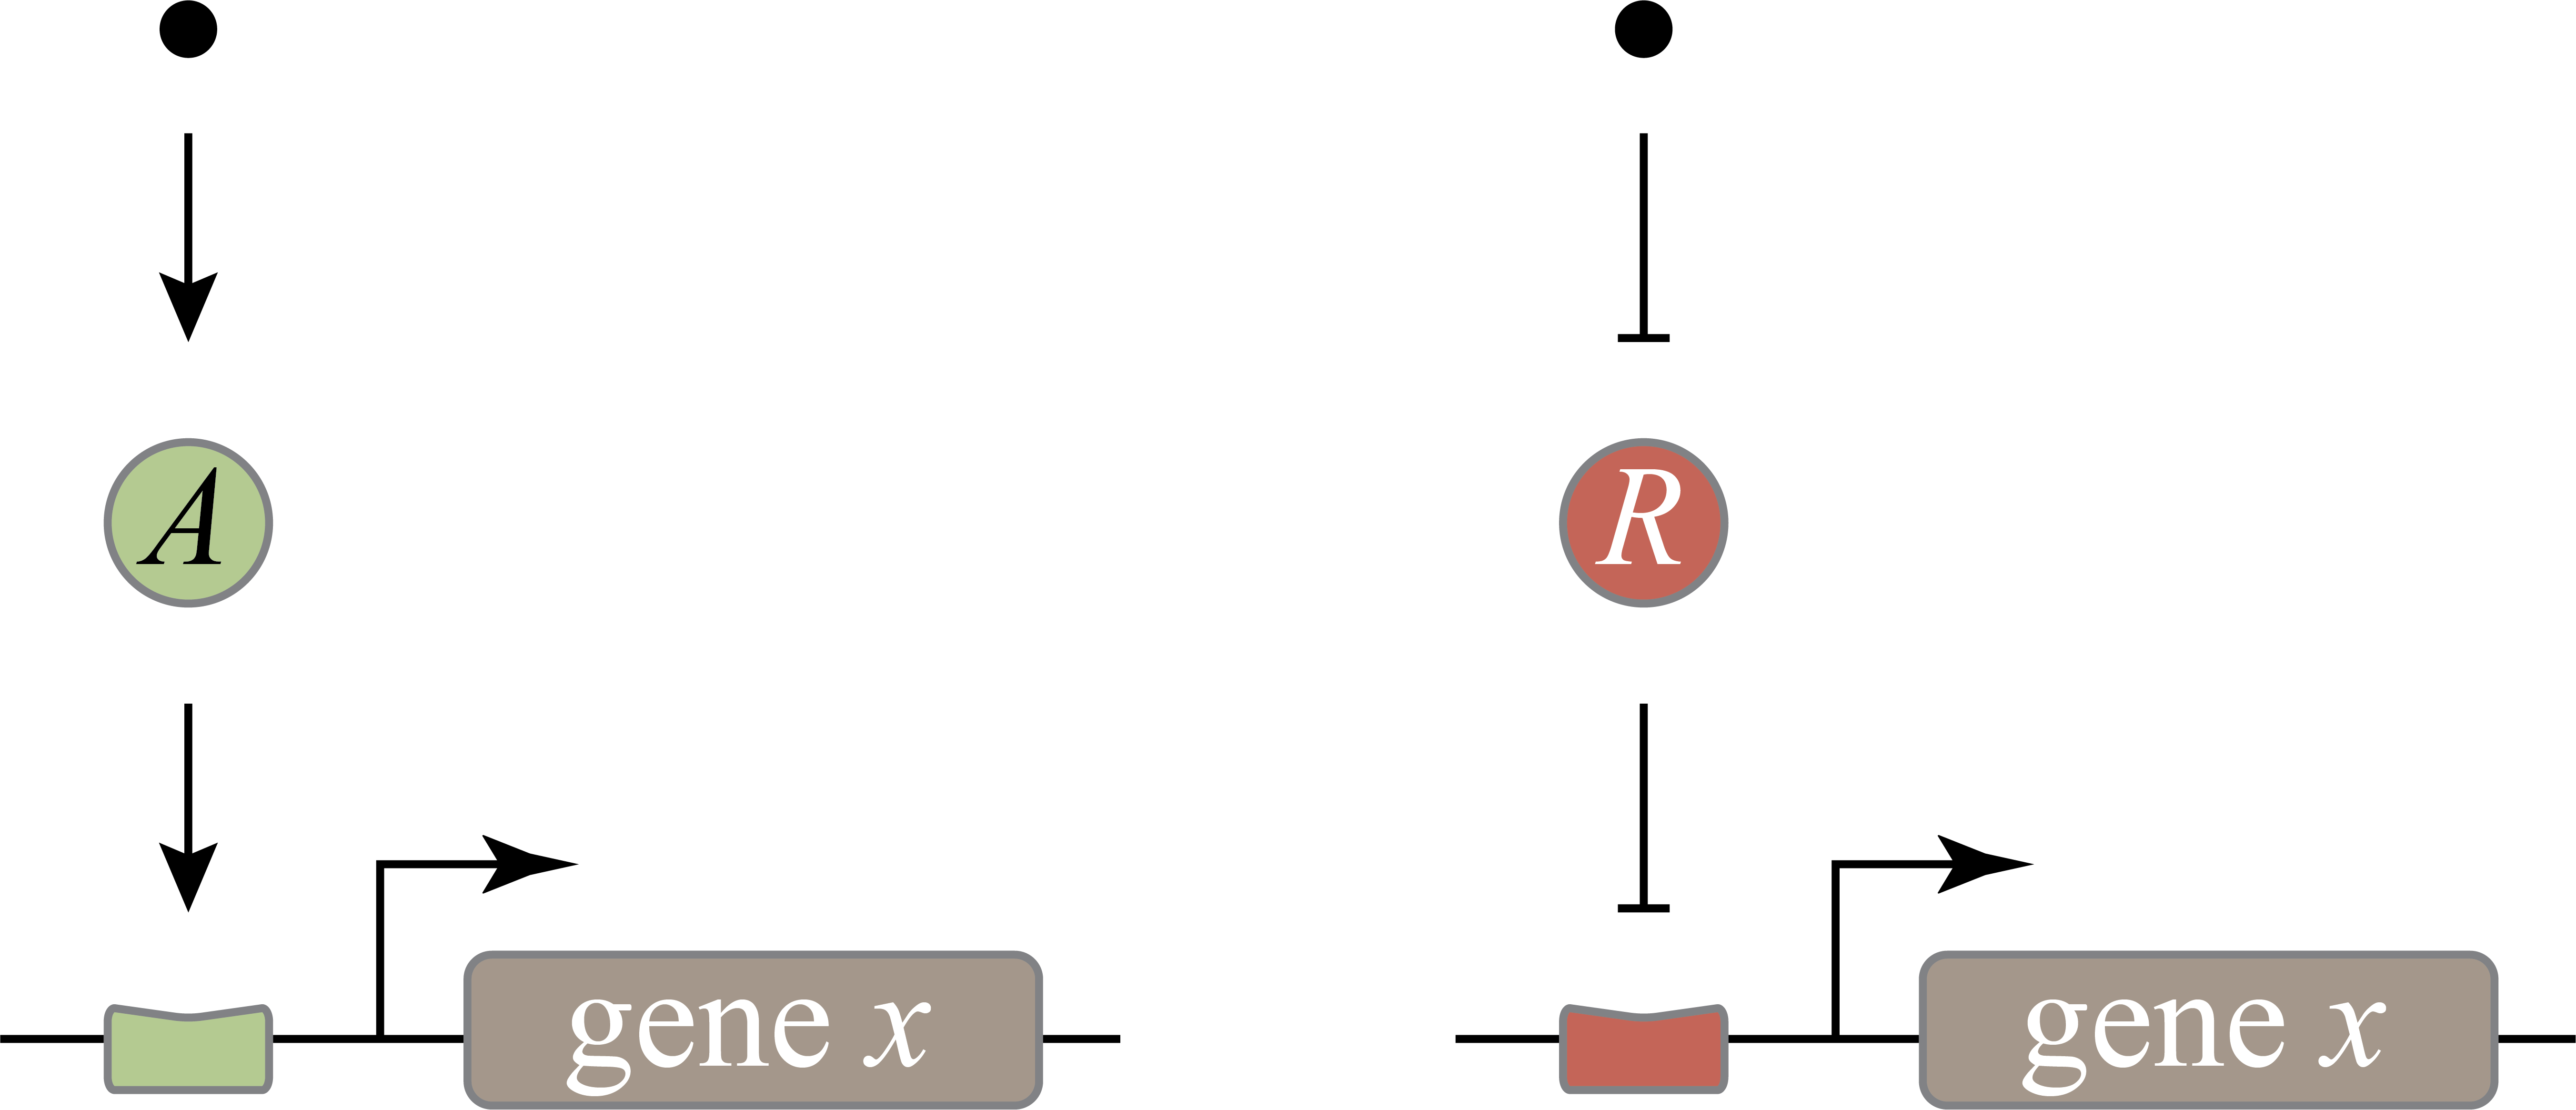 equivalent systems